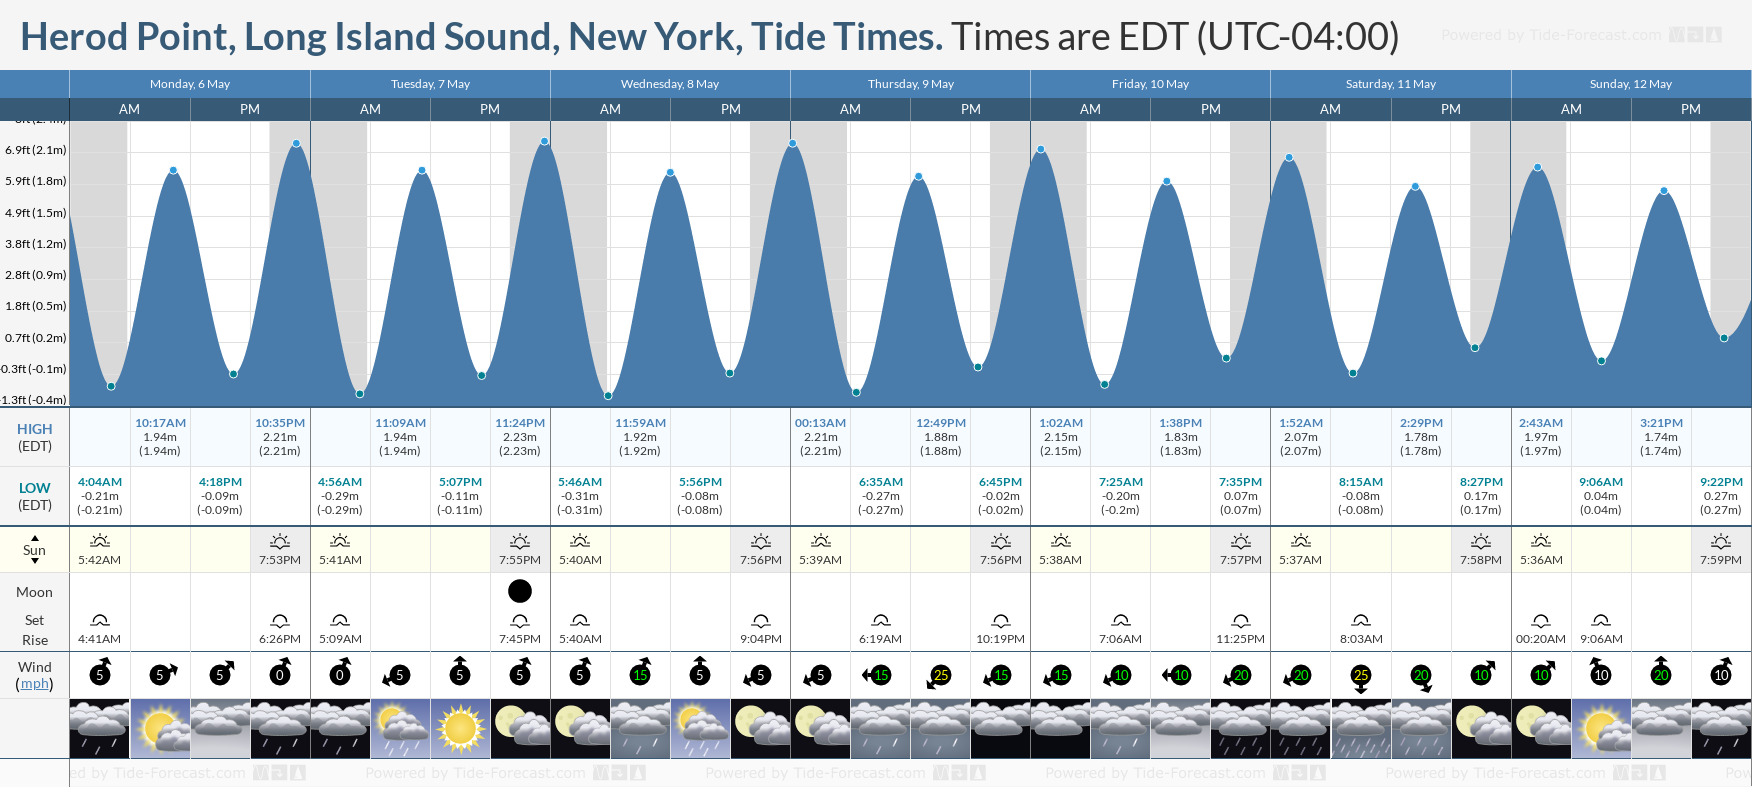 Herod Point, Long Island Sound, New York Tide Chart including high and low tide tide times for the next 7 days